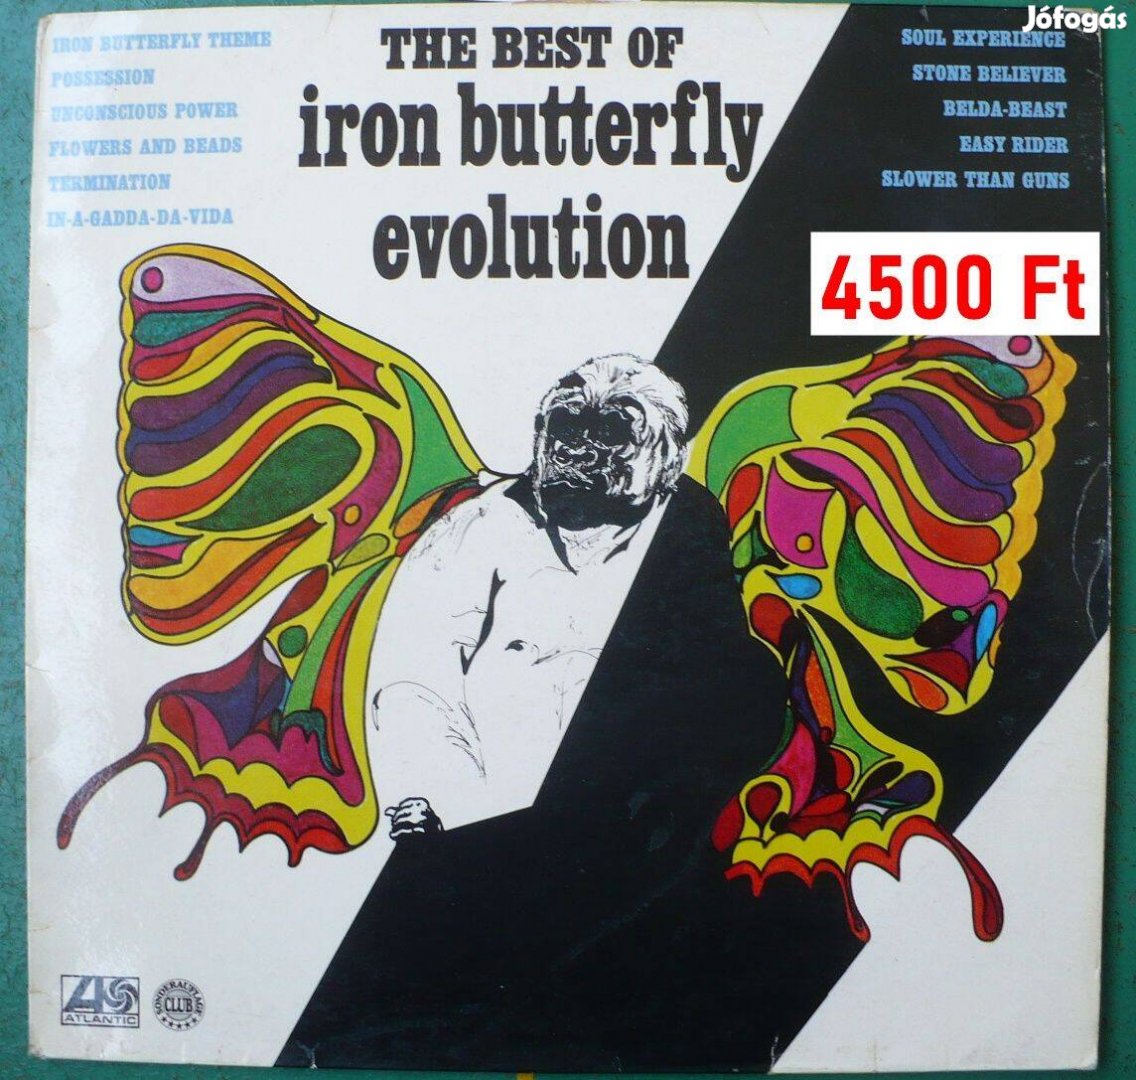 Iron Butterfly: Evolution; Jackson 5ive: Dancing.; Level 42: Running